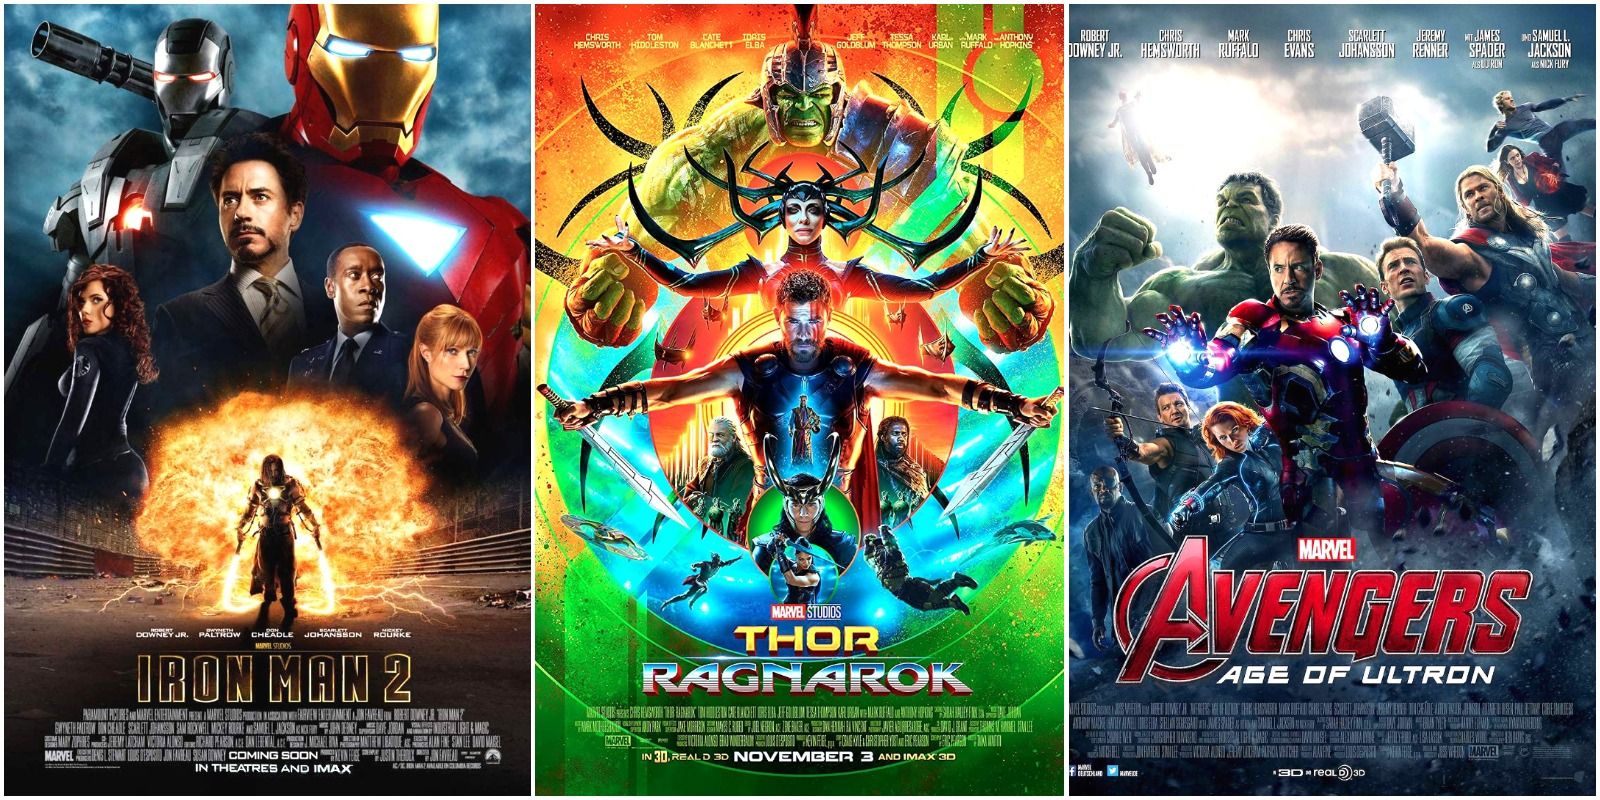 Iron Man 2, Thor 3, and Avengers 2 are movies that seem a bit repetitive story wise